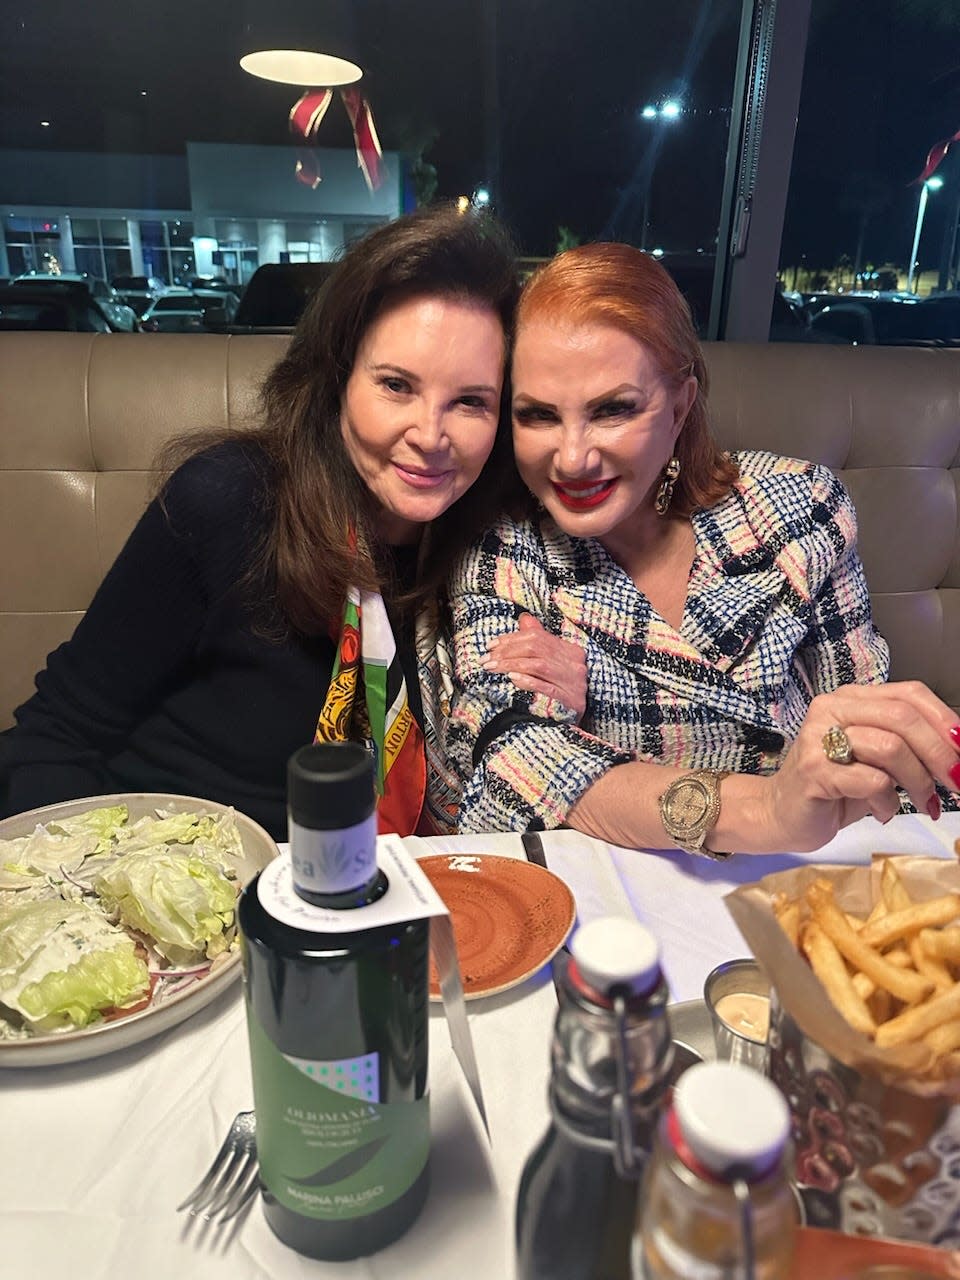 "Southern Charm" star Pat Altschul and Ambassador Georgette Mosbacher at Dorona.